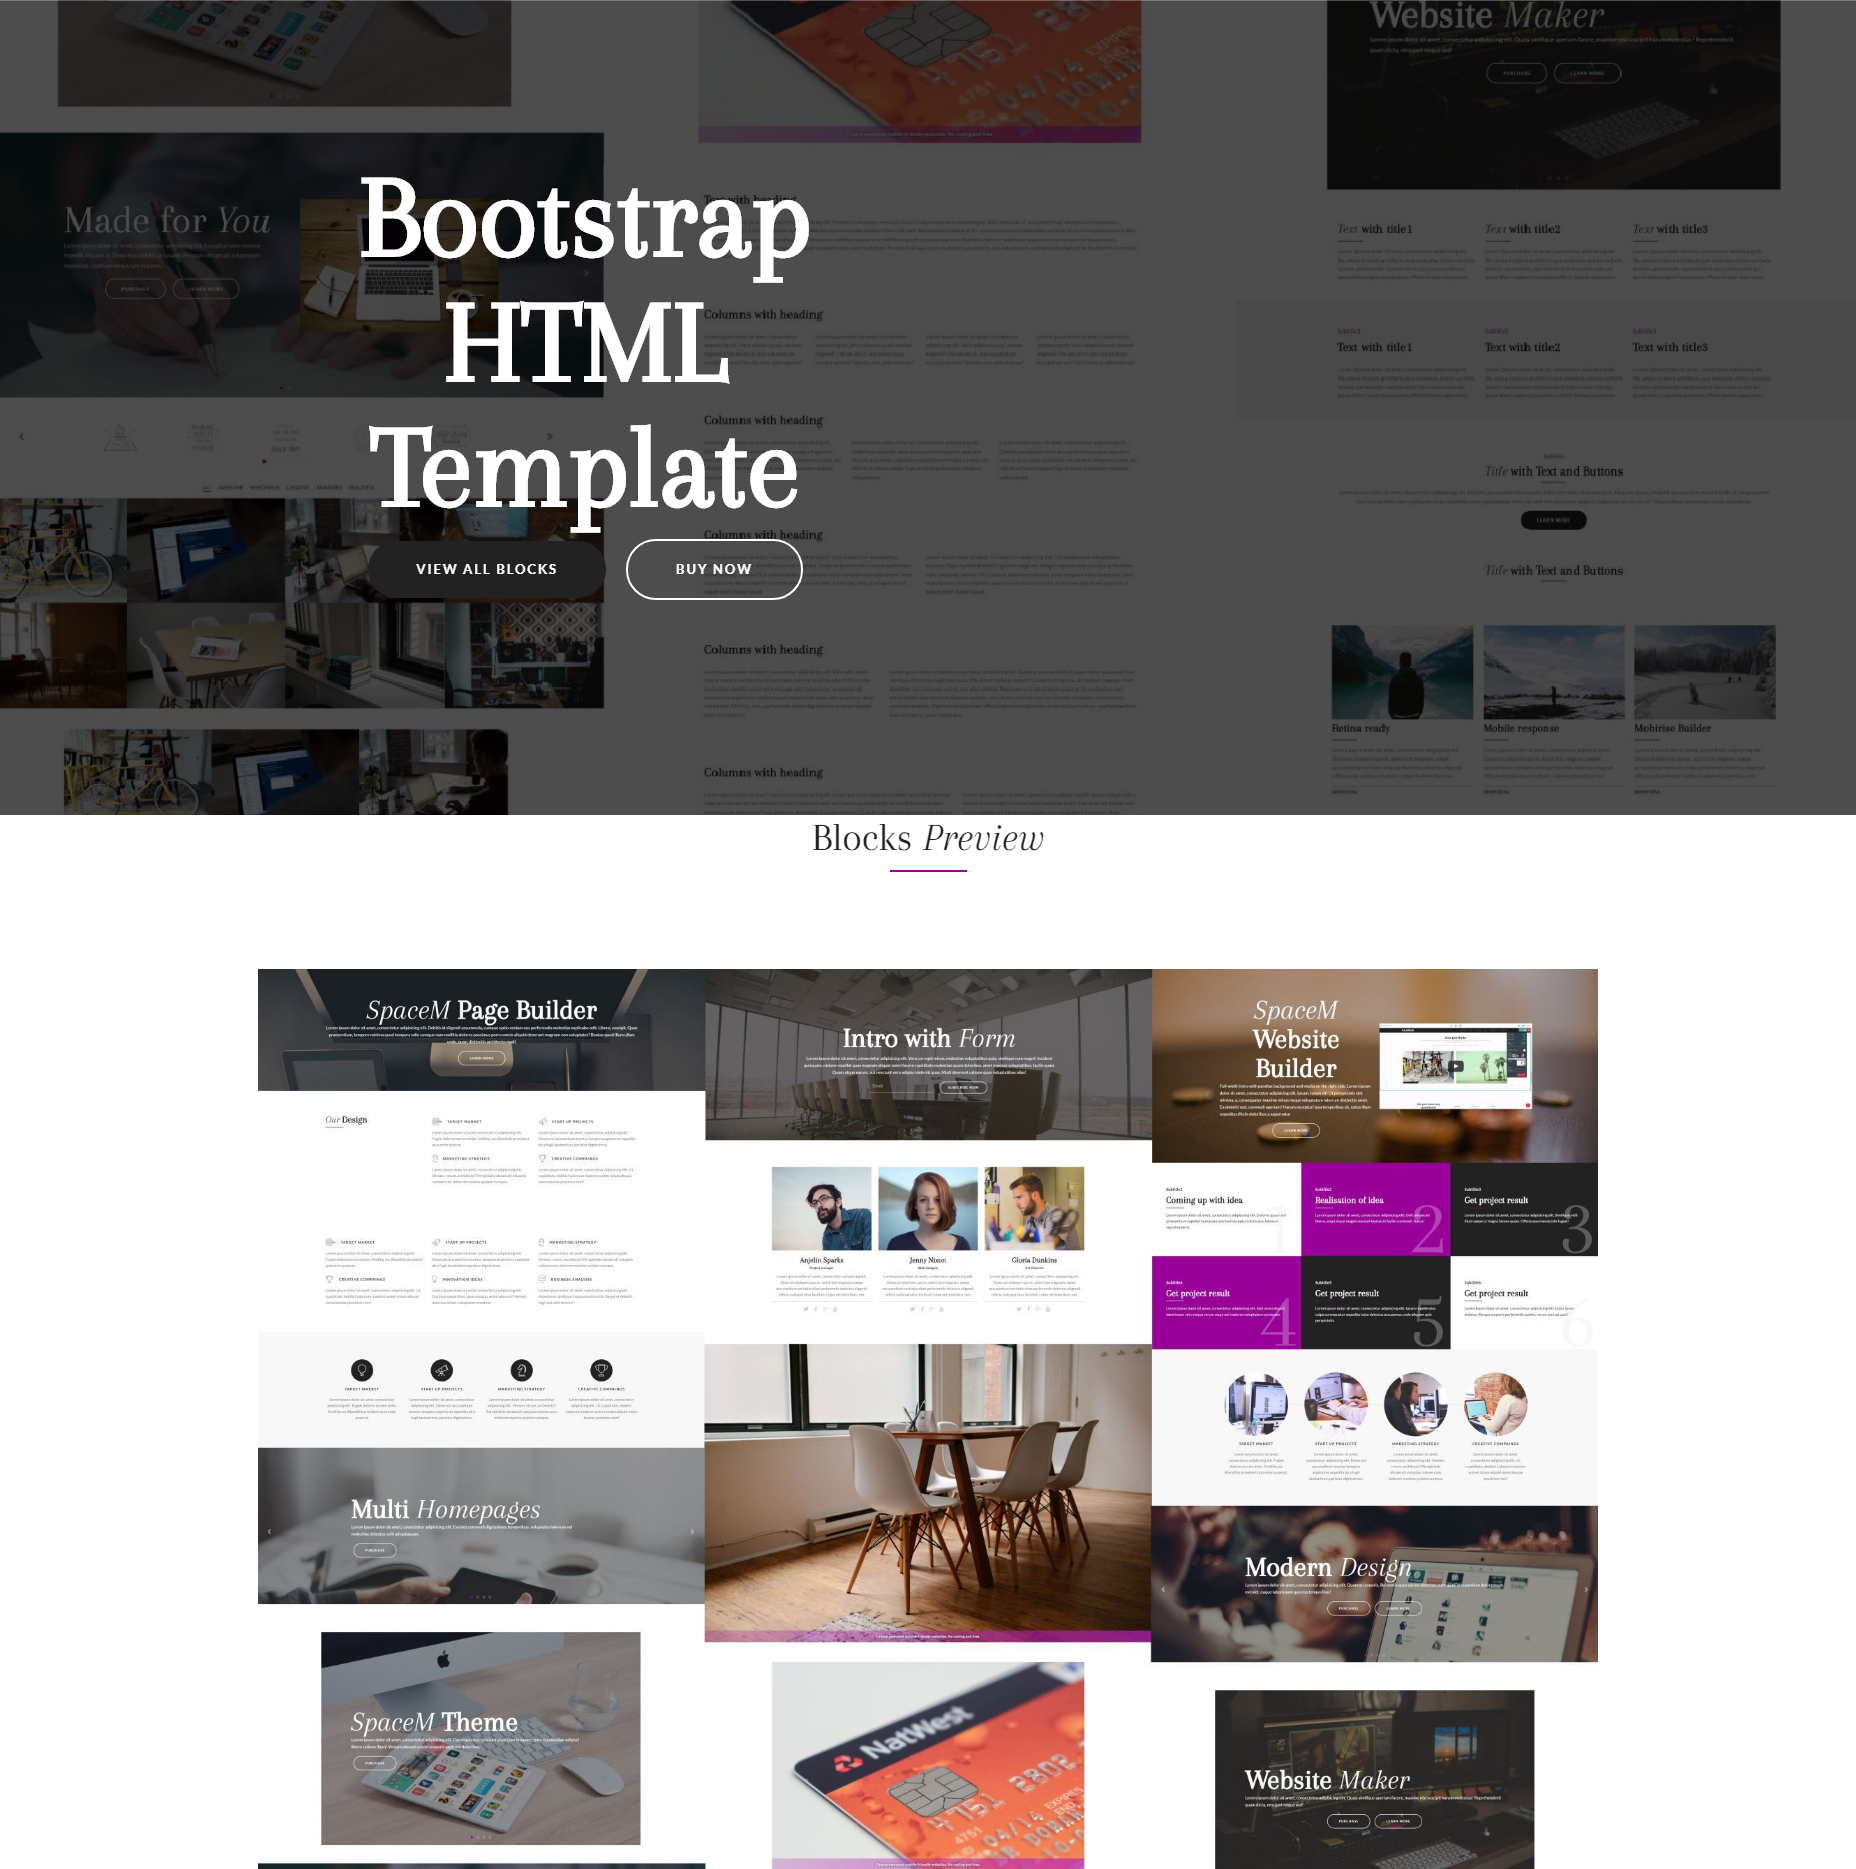 Responsive Bootstrap SpaceM Templates